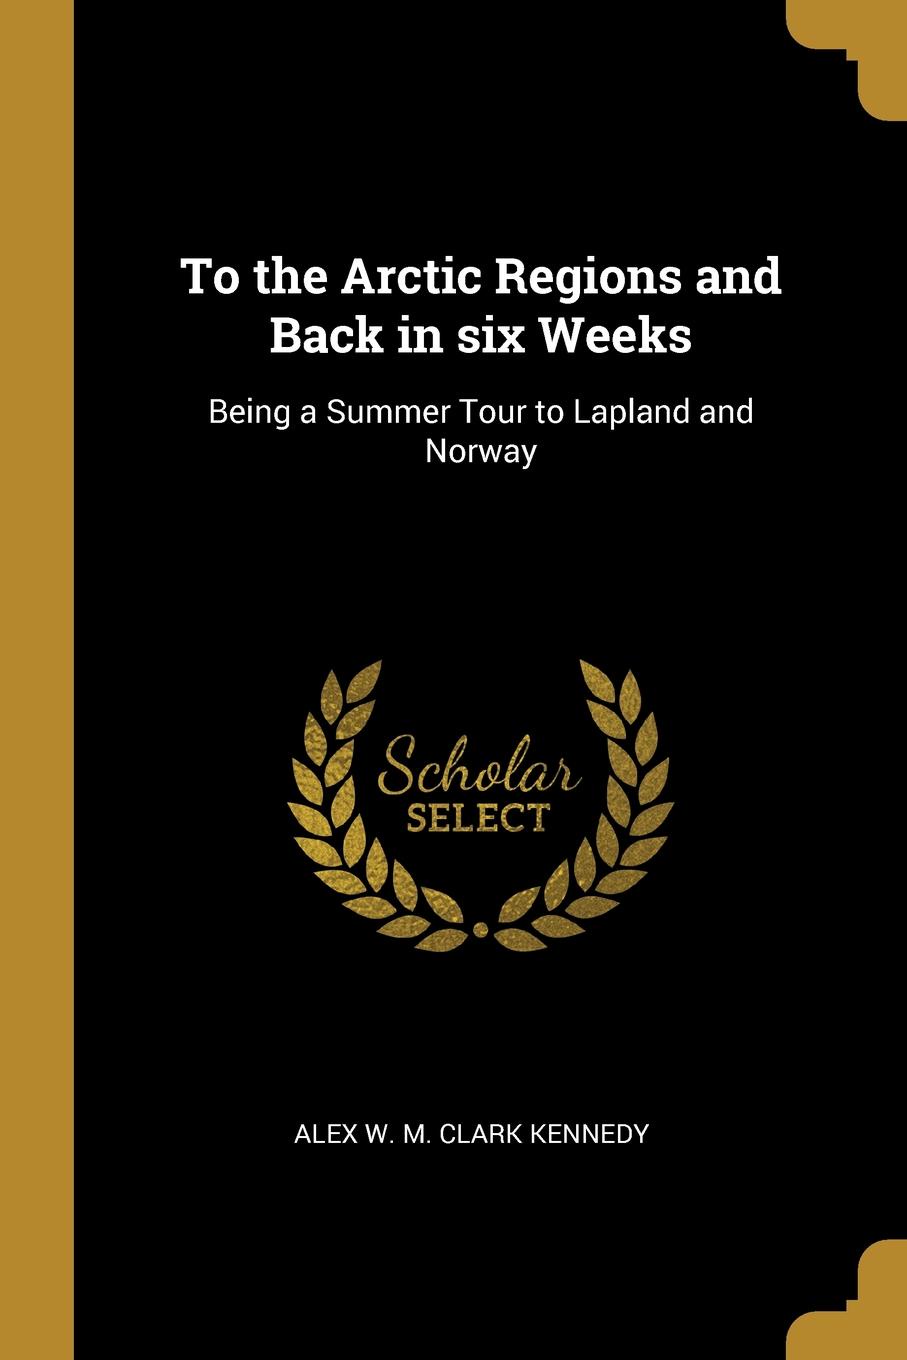 To the Arctic Regions and Back in six Weeks. Being a Summer Tour to Lapland and Norway